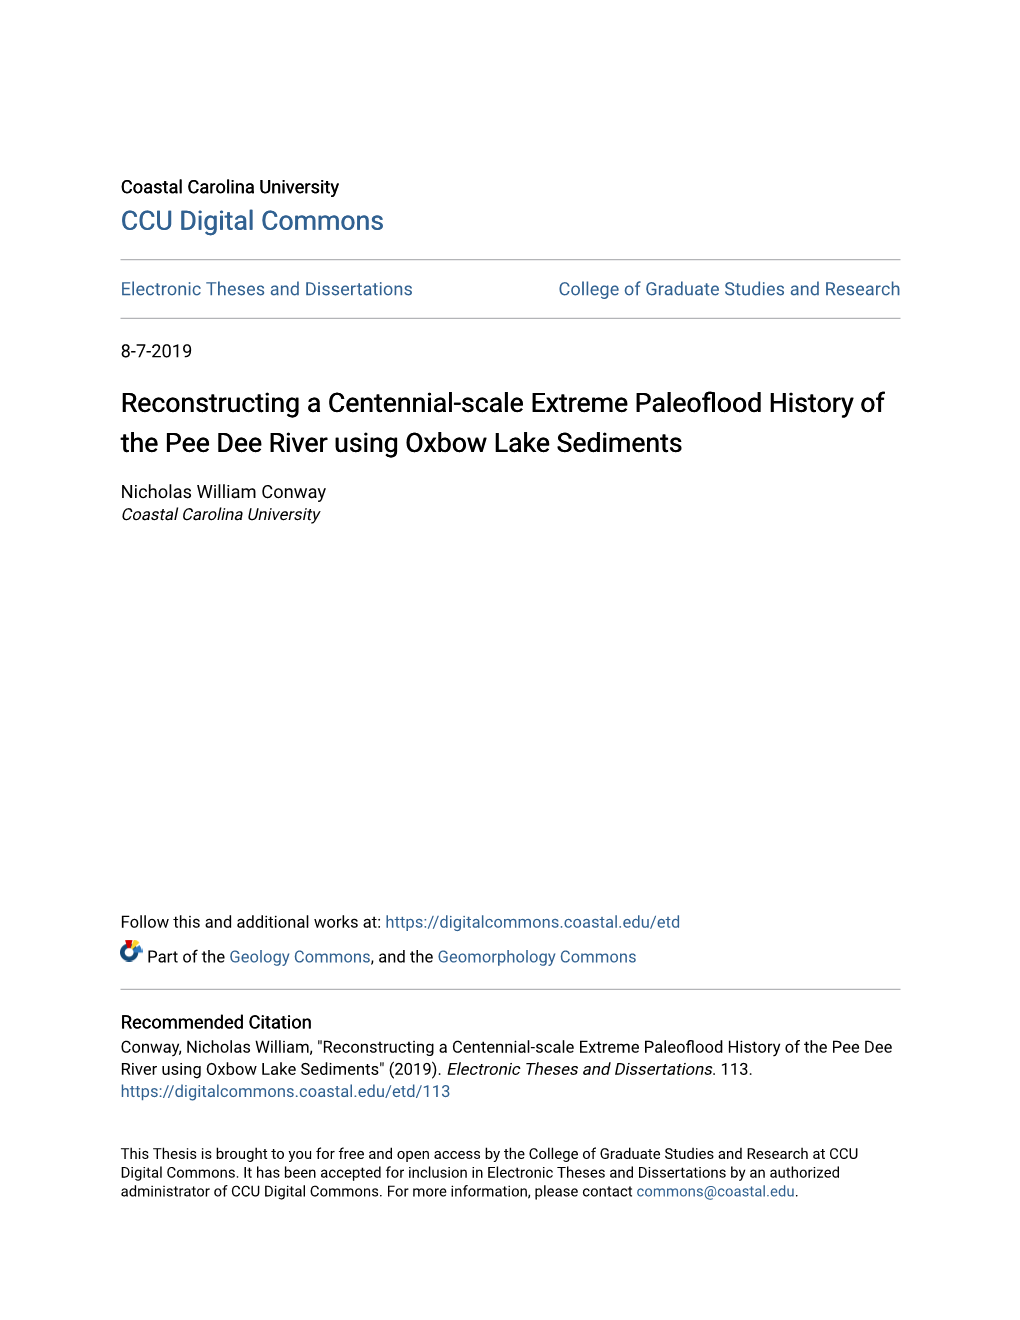 Reconstructing a Centennial-Scale Extreme Paleoflood History of the Pee Dee River Using Oxbow Lake Sediments